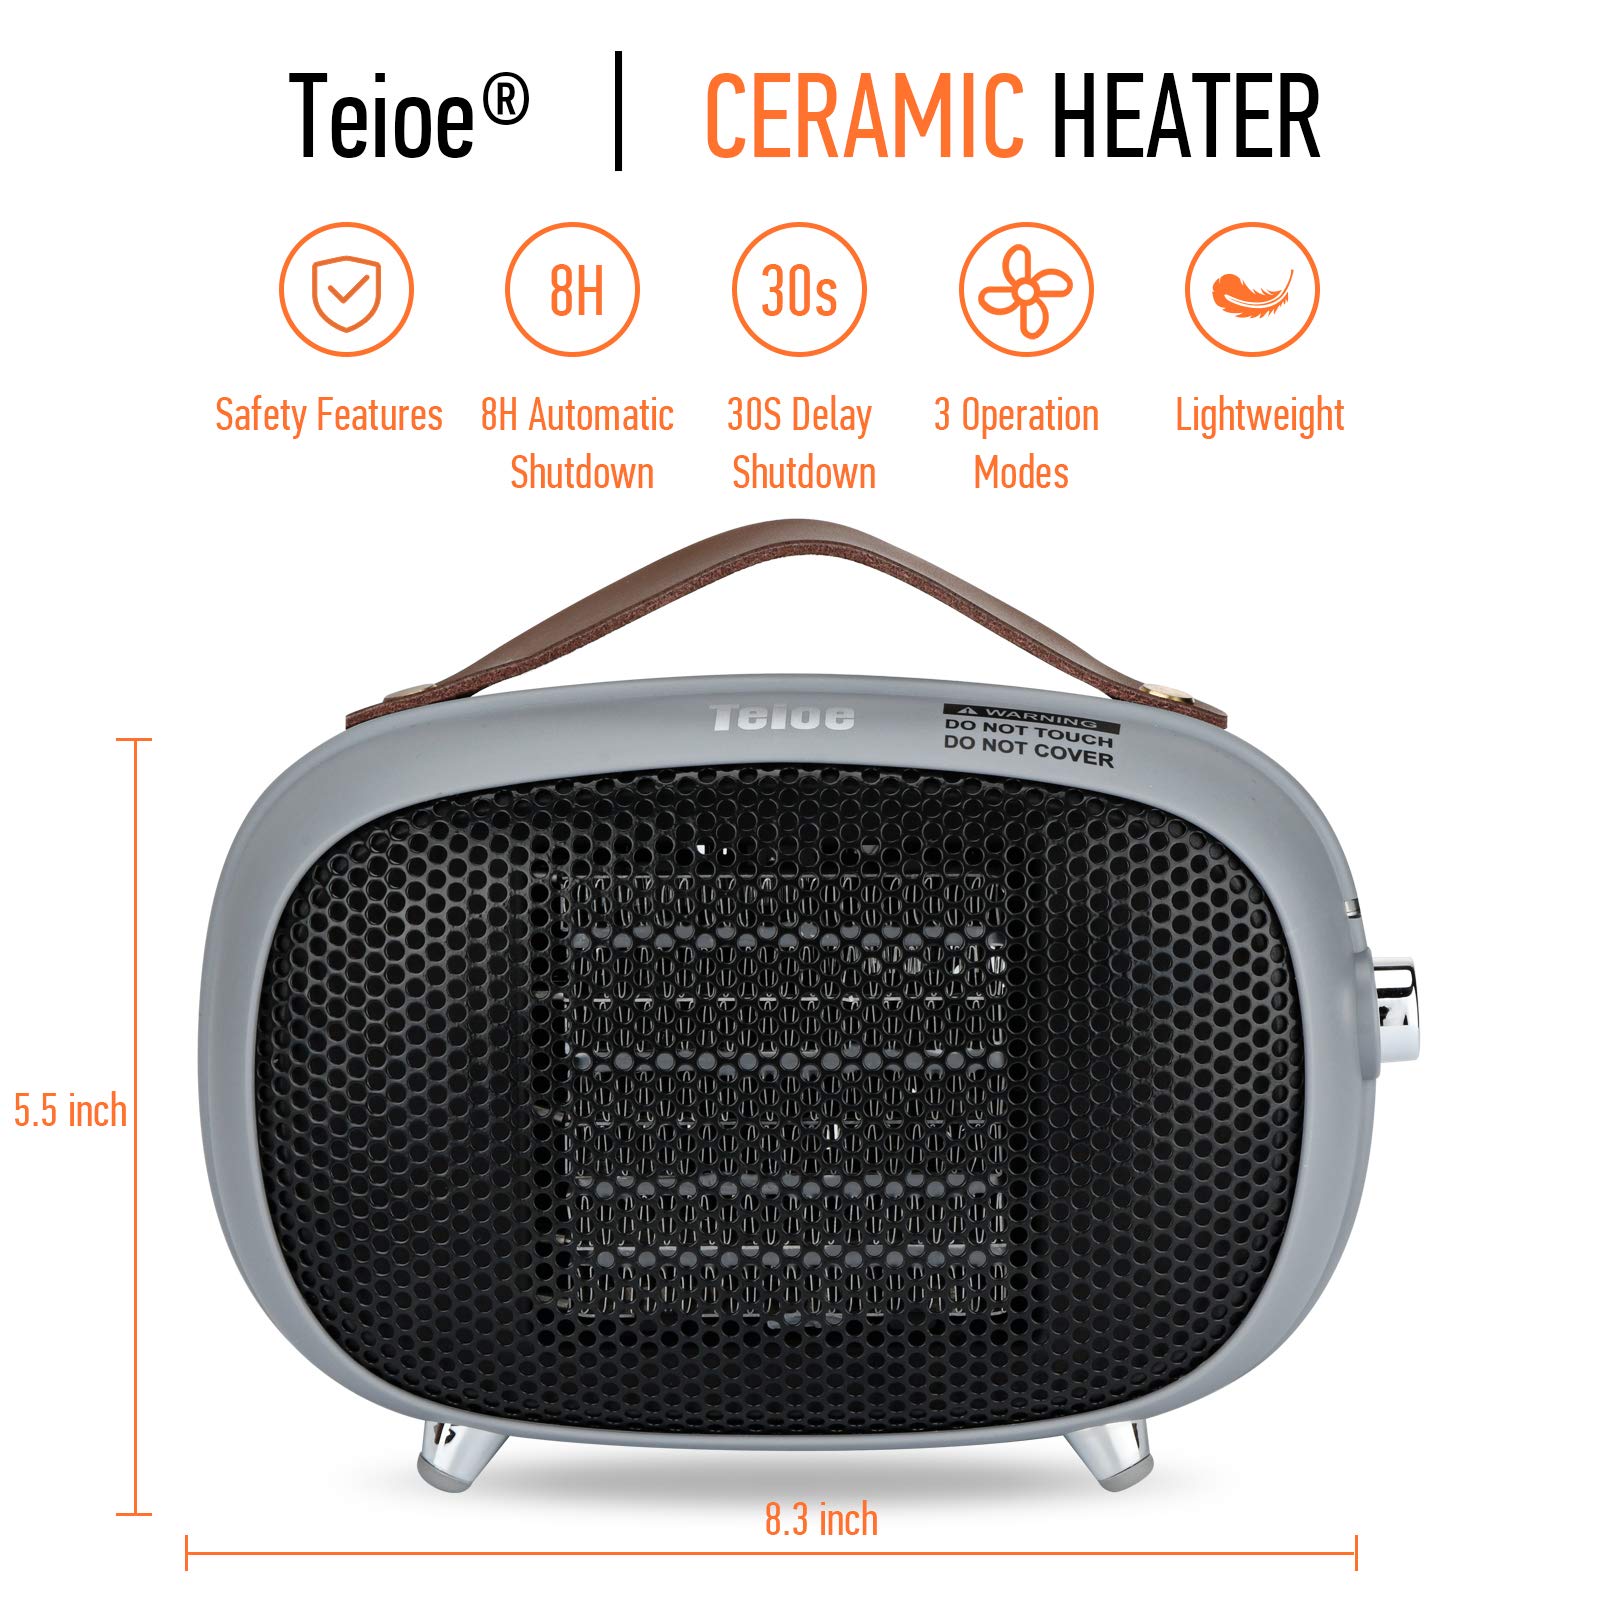 Space Heater, Teioe Mini Electric Space Heater 800W/400W, Small PTC Ceramic Heater with Tip-Over and Overheat Protection, 3 Operating Modes, Space Heaters for Office, Bedroom and Under Desk (GREY)